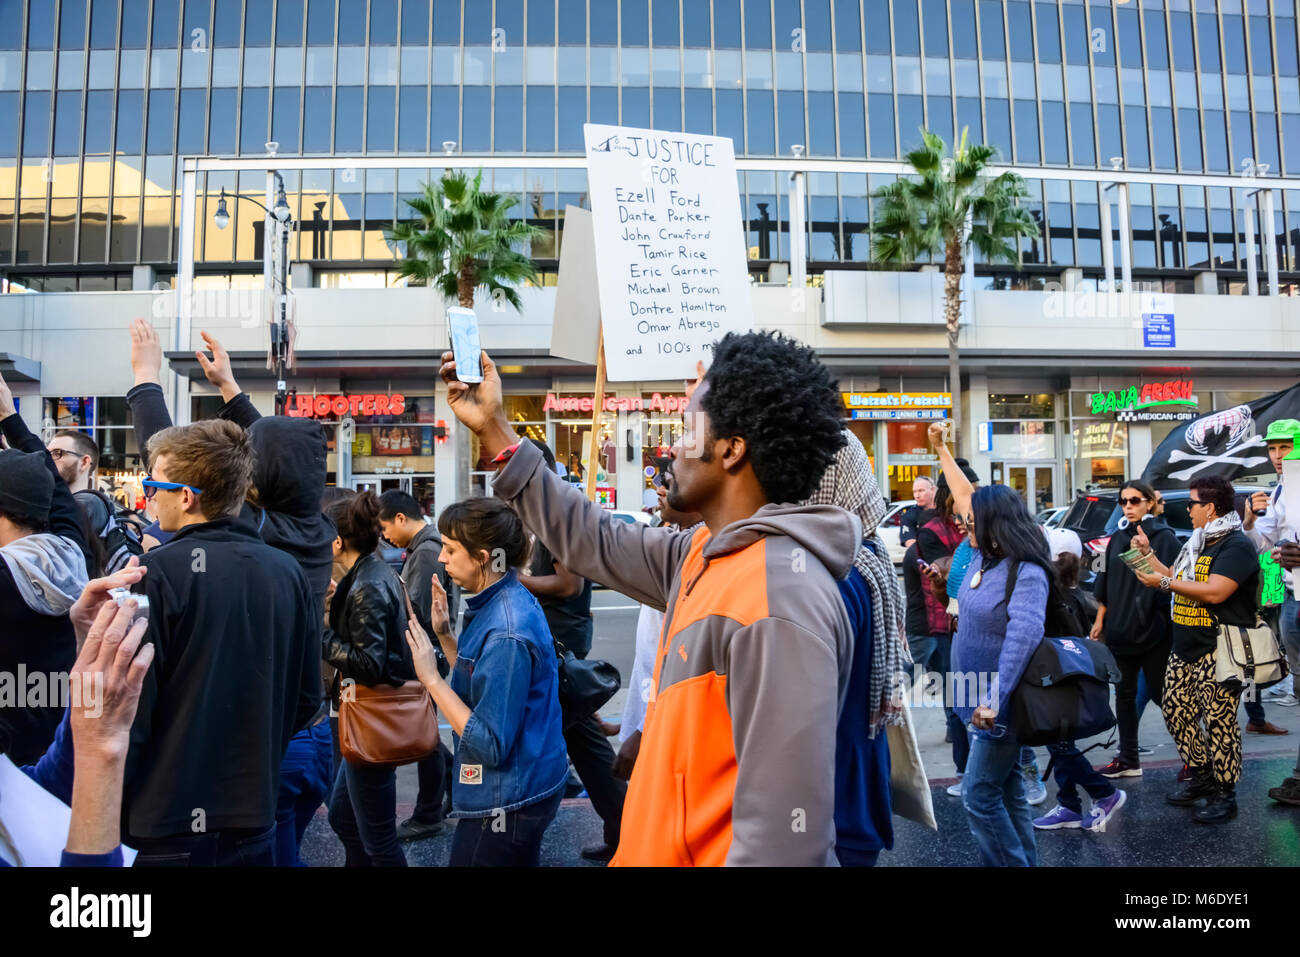 Justice for Blacks Protest against Police Killings Hollywood Boulevard Los Angeles California Stock Photo